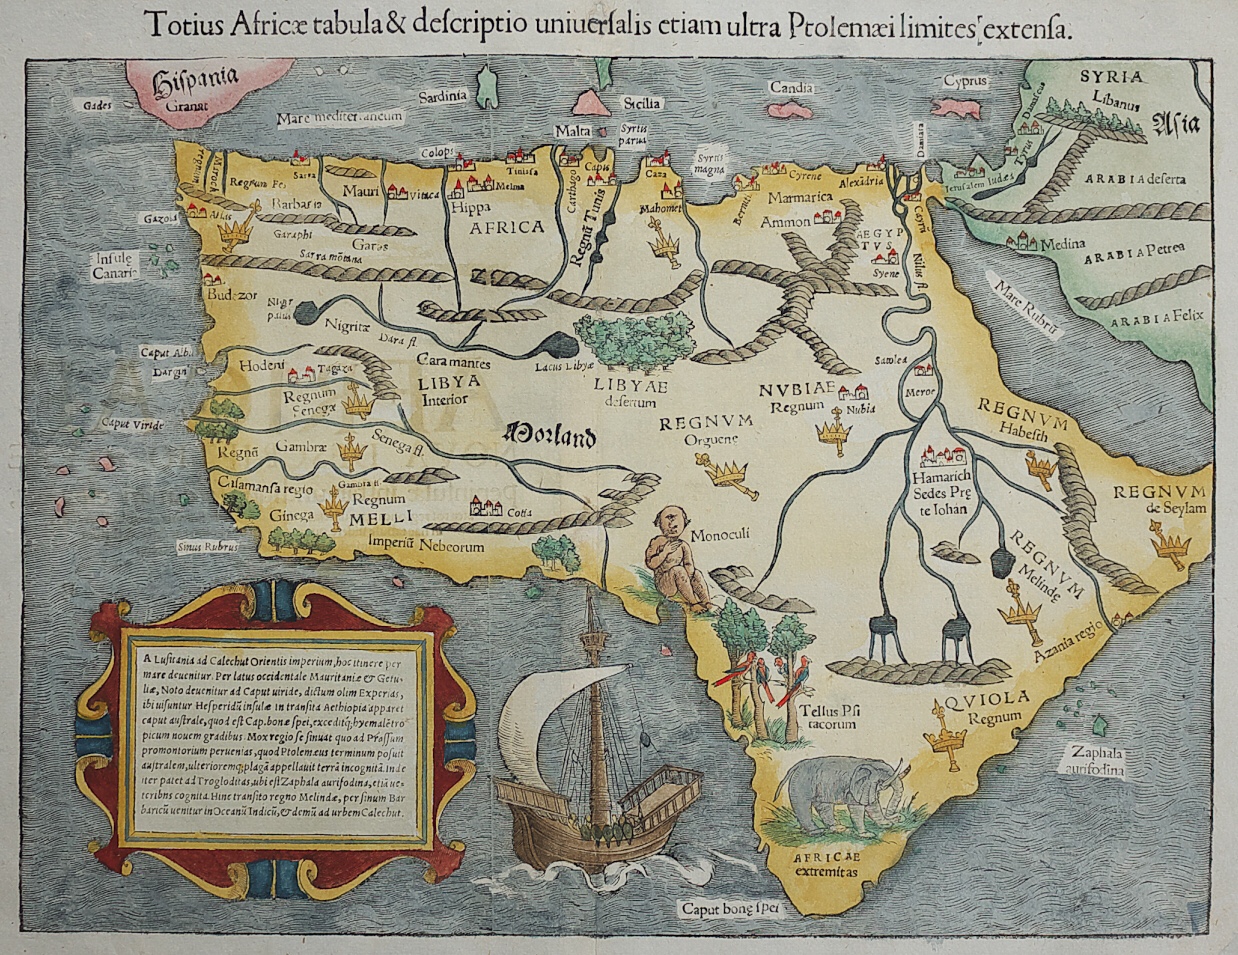 The first map of Africa was drawn in 1552